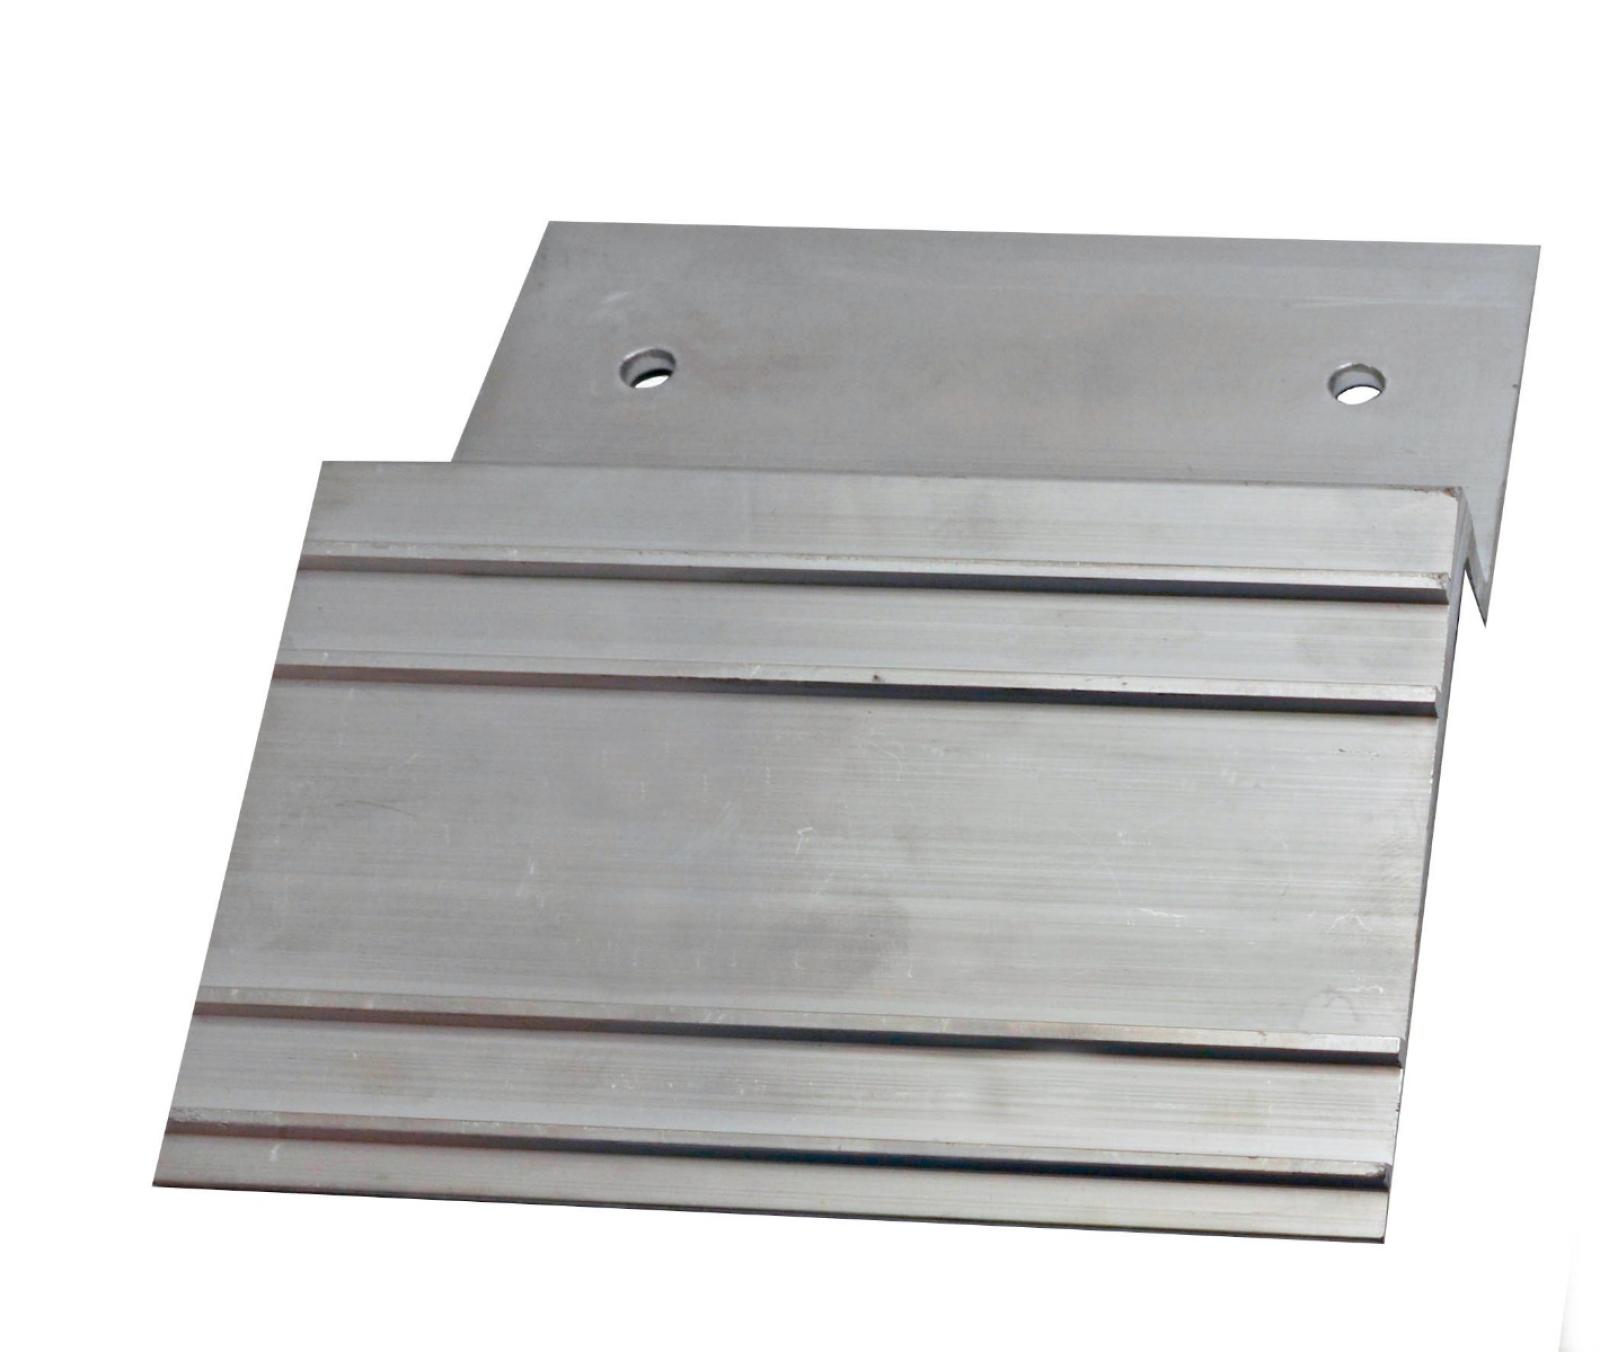 Aluminum Ramp End Plate. Rated at 750 lb.